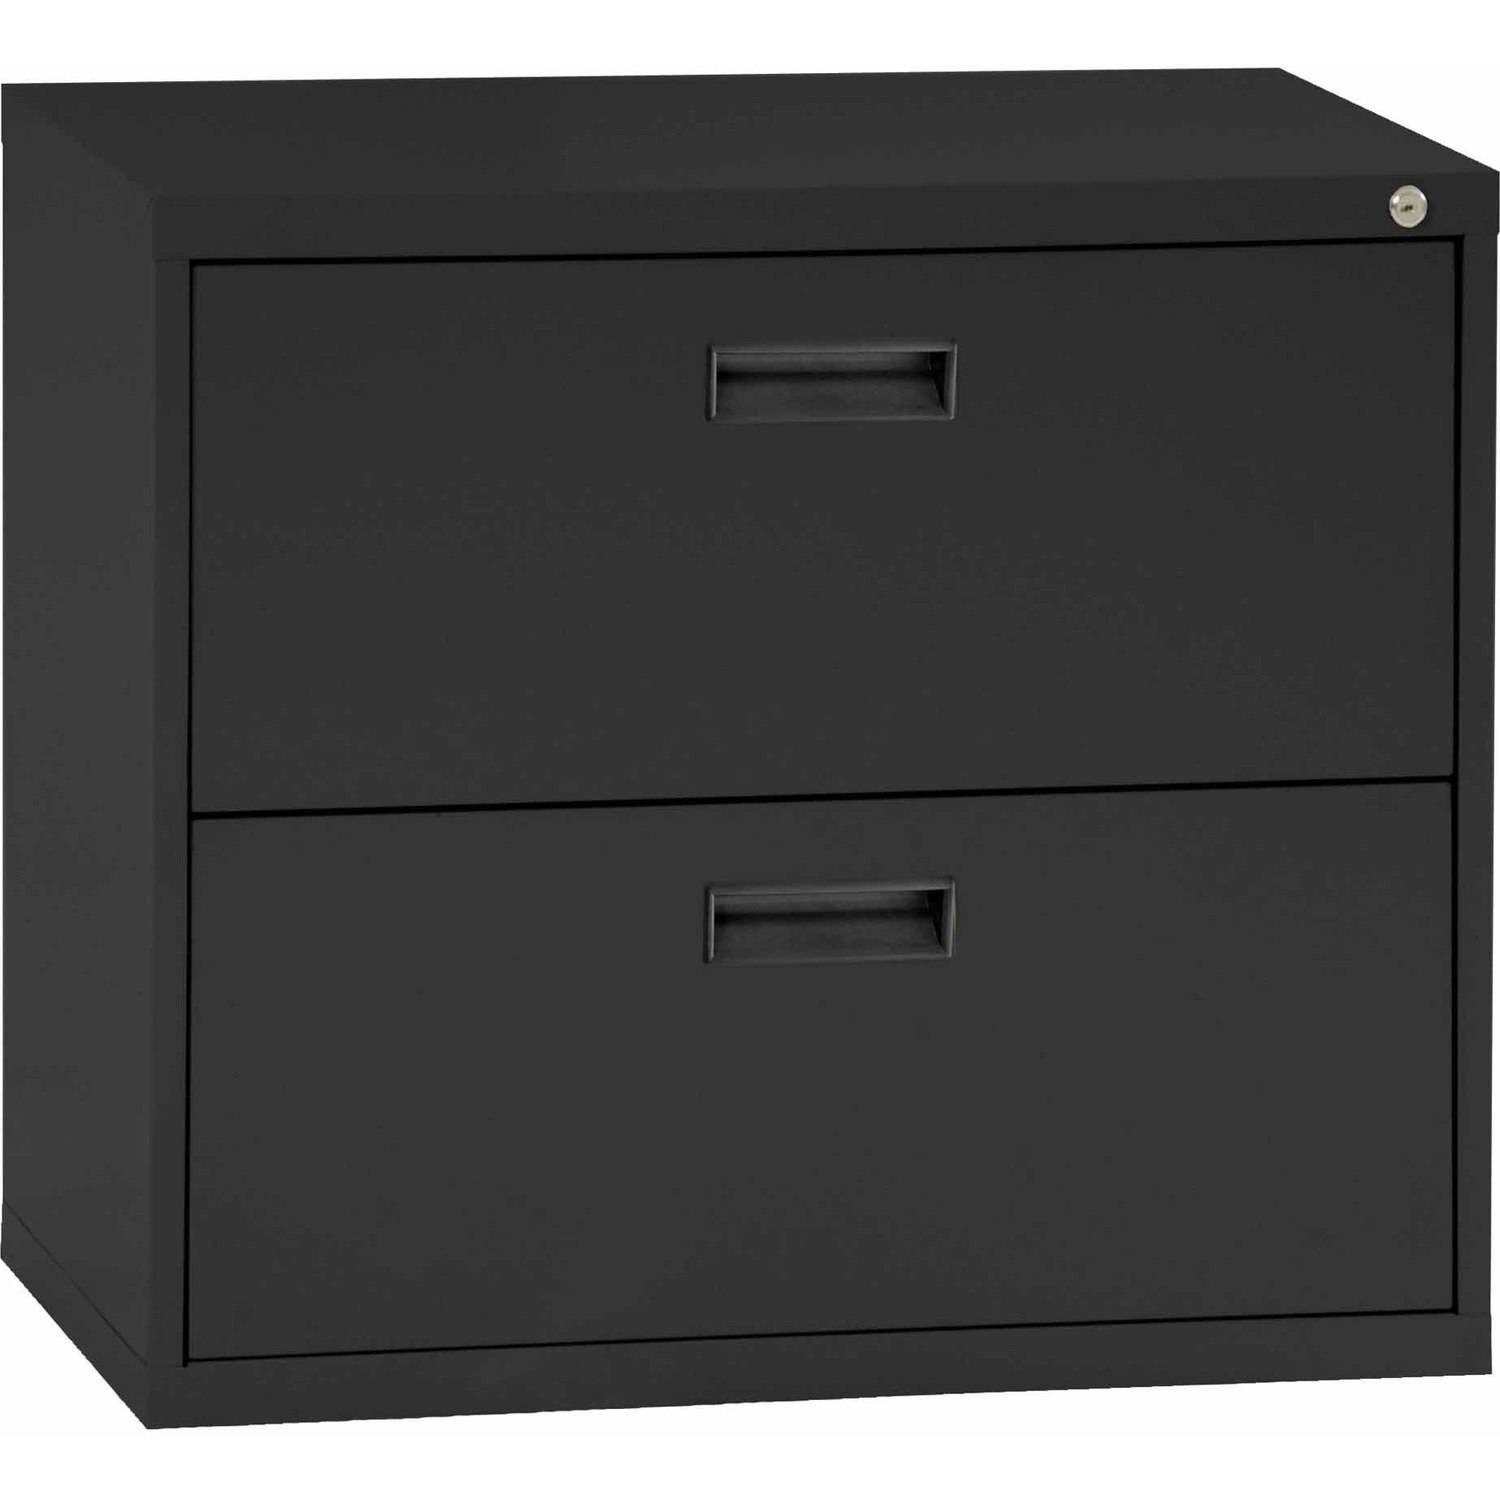 Sandusky Steel Lateral File Cabinet With Plastic Handle 2 Drawers regarding proportions 1500 X 1500